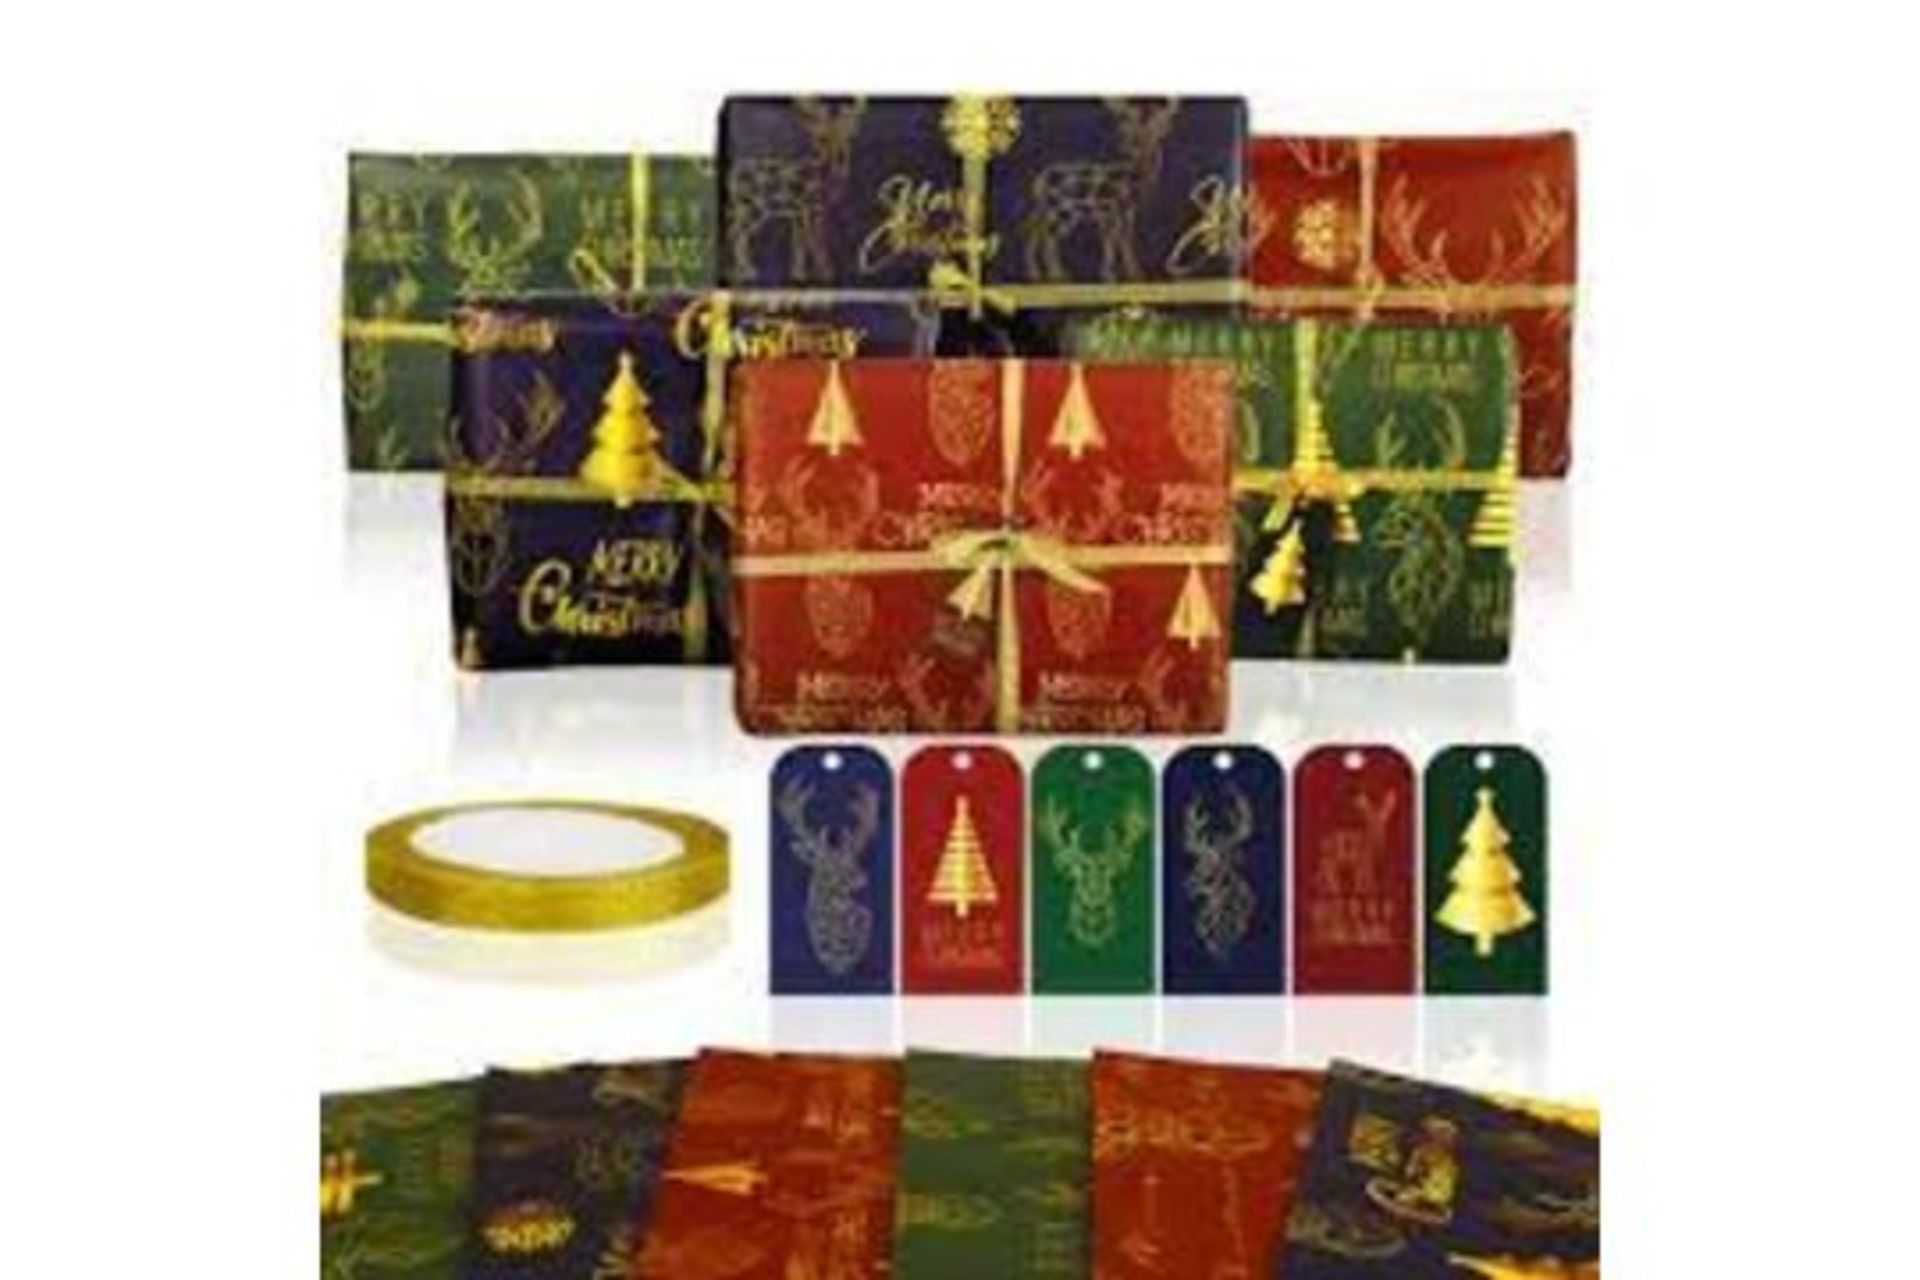 TRADE LOT 600 X BRAND NEW ASSORTED SETS OF 6 FOLDED SHEETS LUXURY CHRISTMAS WRAPPING PAPER SETS IN